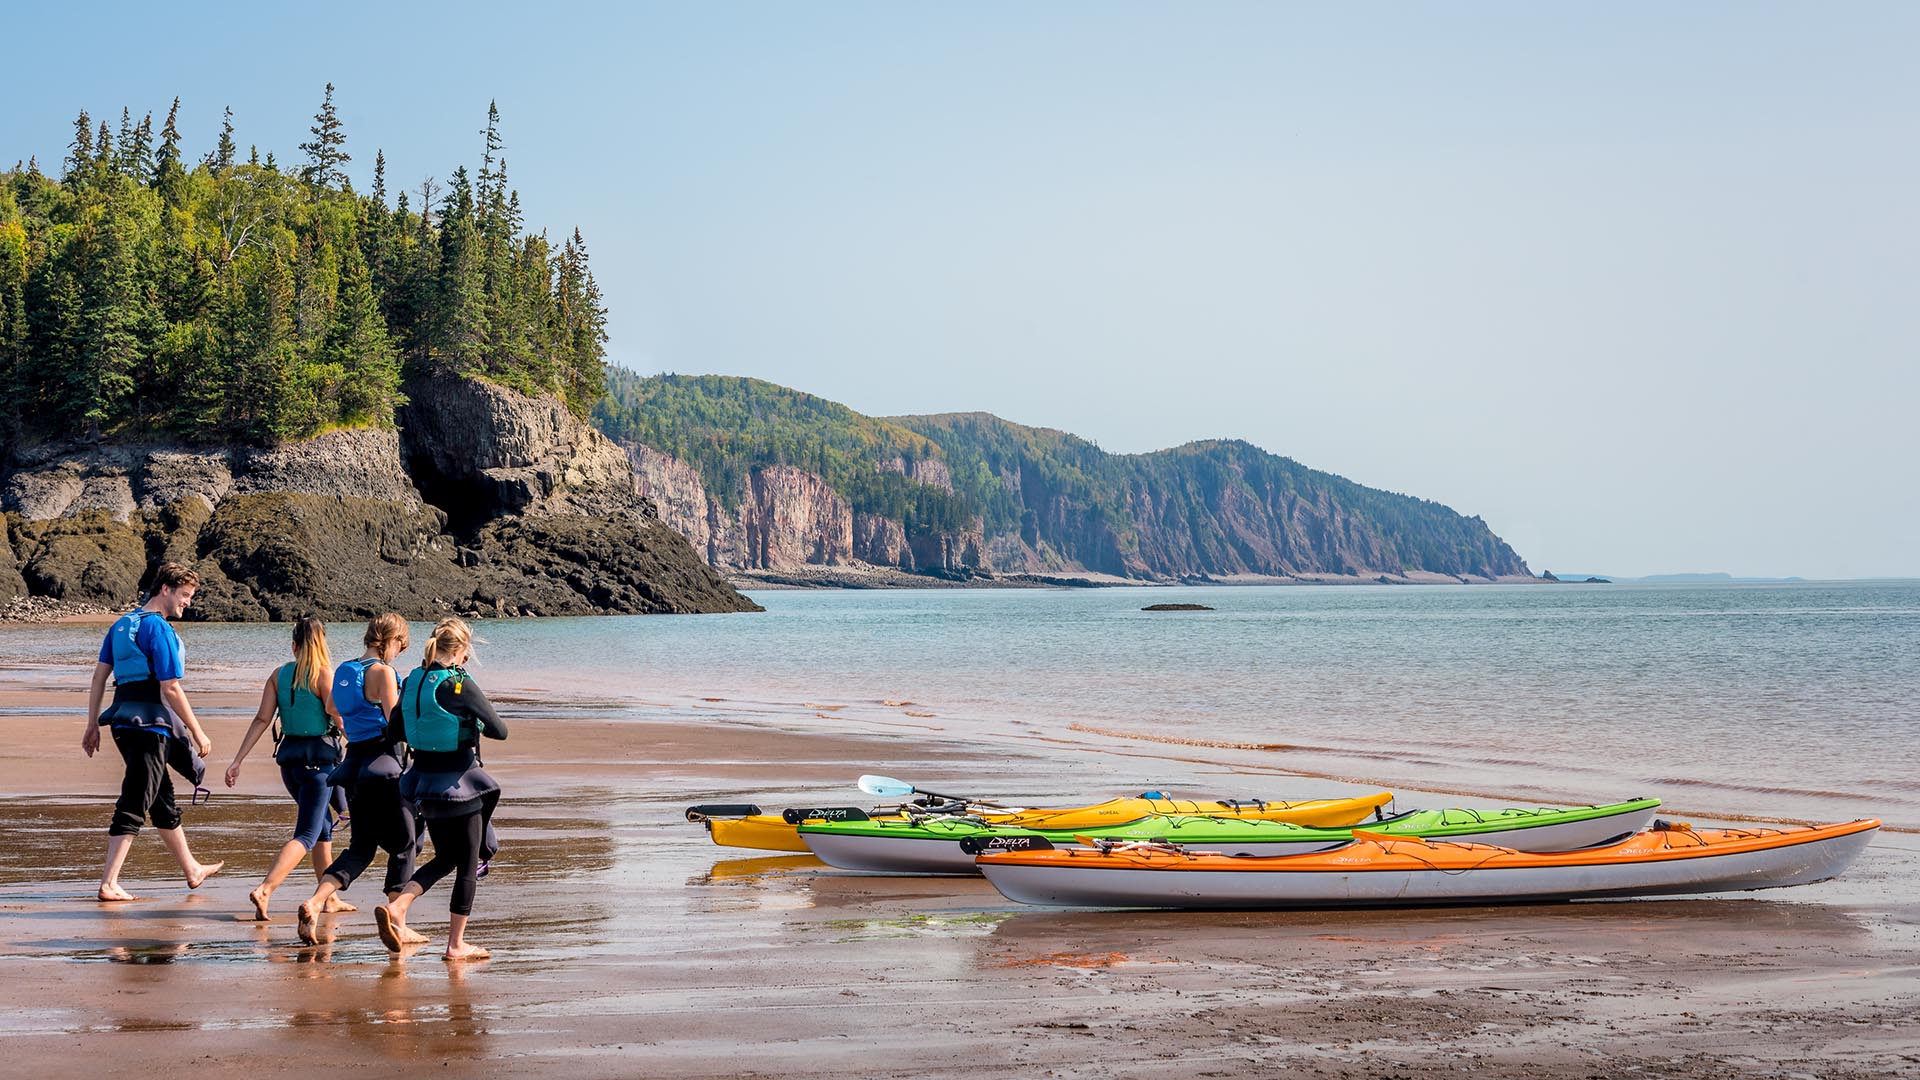 Cliffs of Fundy UNESCO Global Geopark